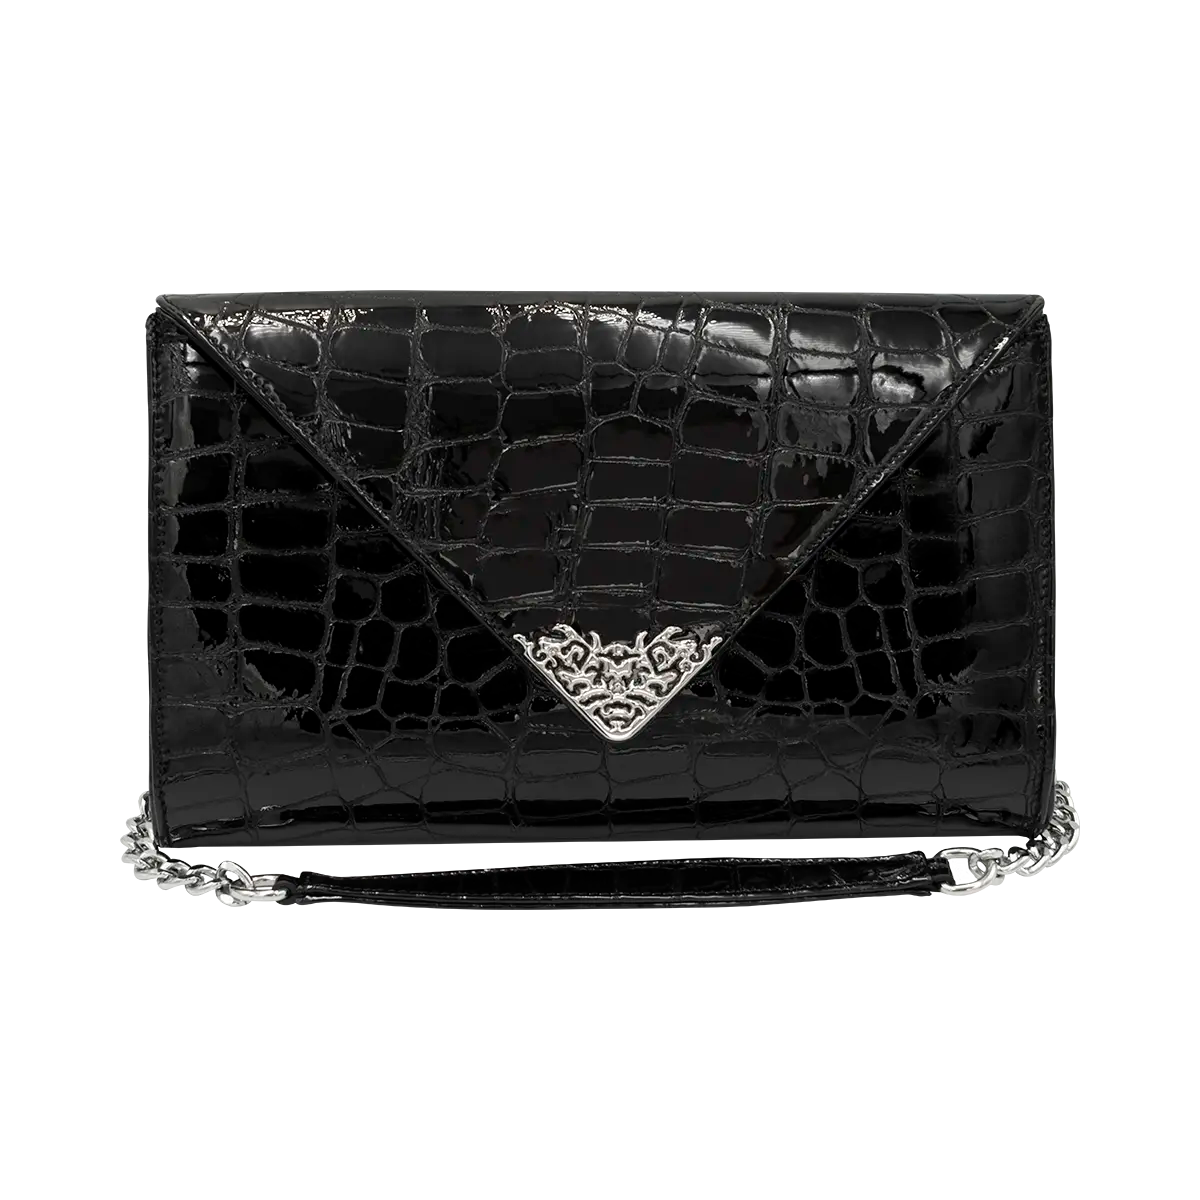 large black patent print leather clutch with strap. Fashion accessory for women in San Diego, CA.